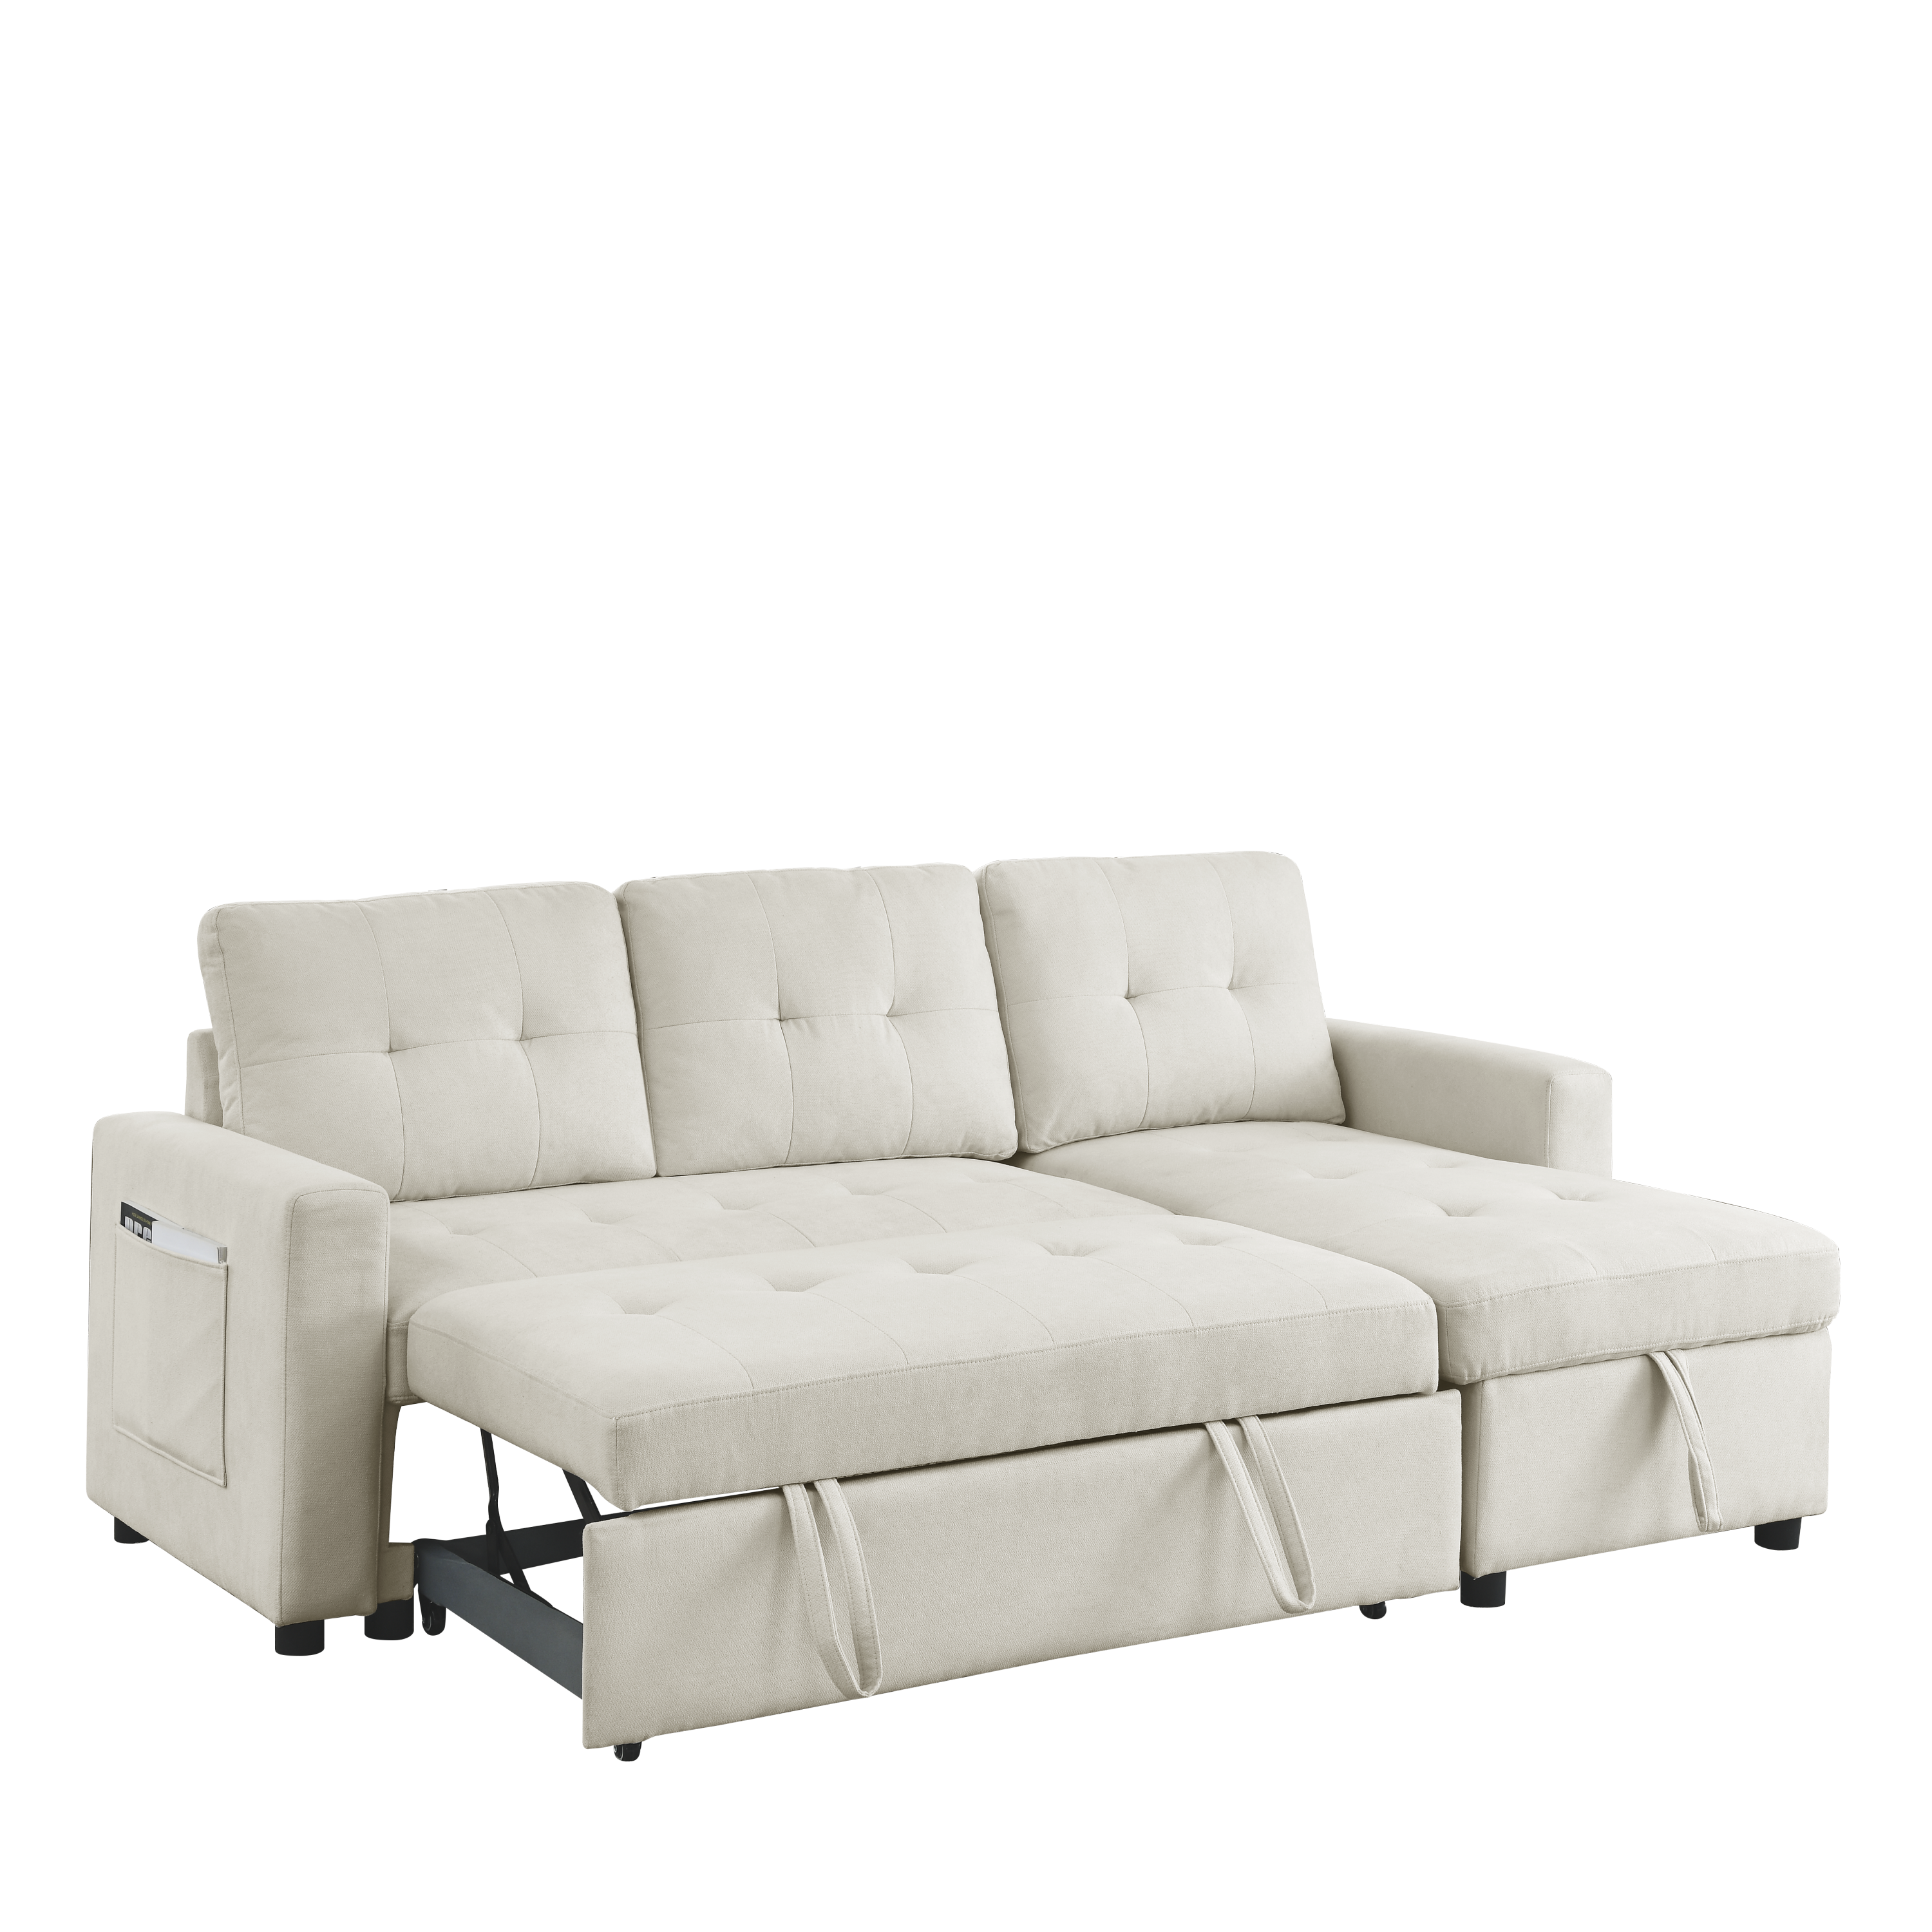 Beige Sleeper Sectional Sofa w/ Storage & Reversible Chaise-Sleeper Sectionals-American Furniture Outlet